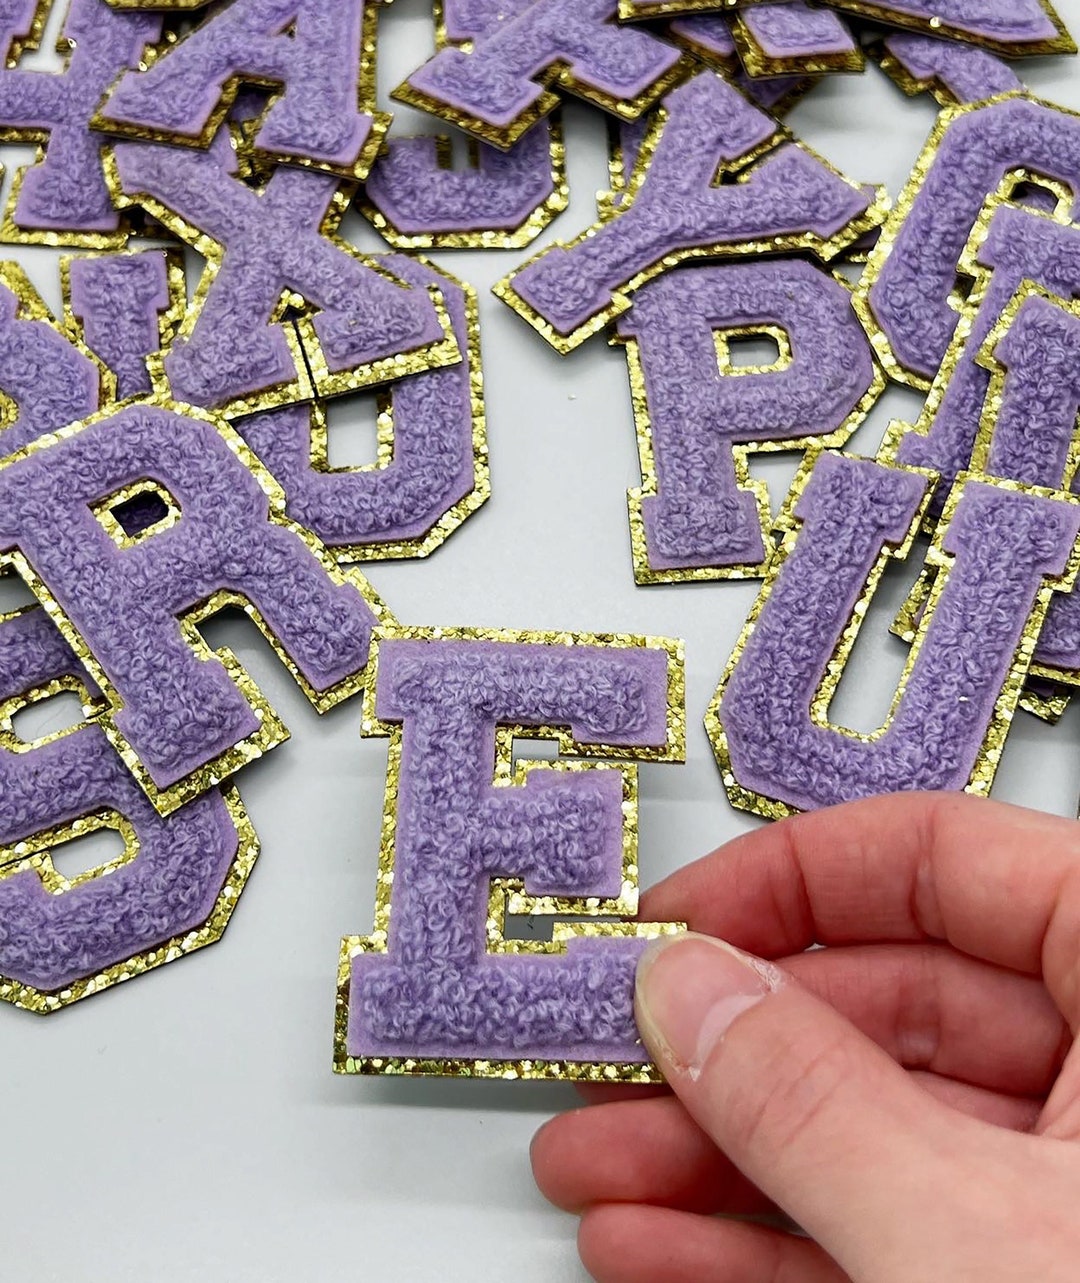 PURPLE 2.4 SELF ADHESIVE Chenille Glitter Letter Patch 3M - Etsy